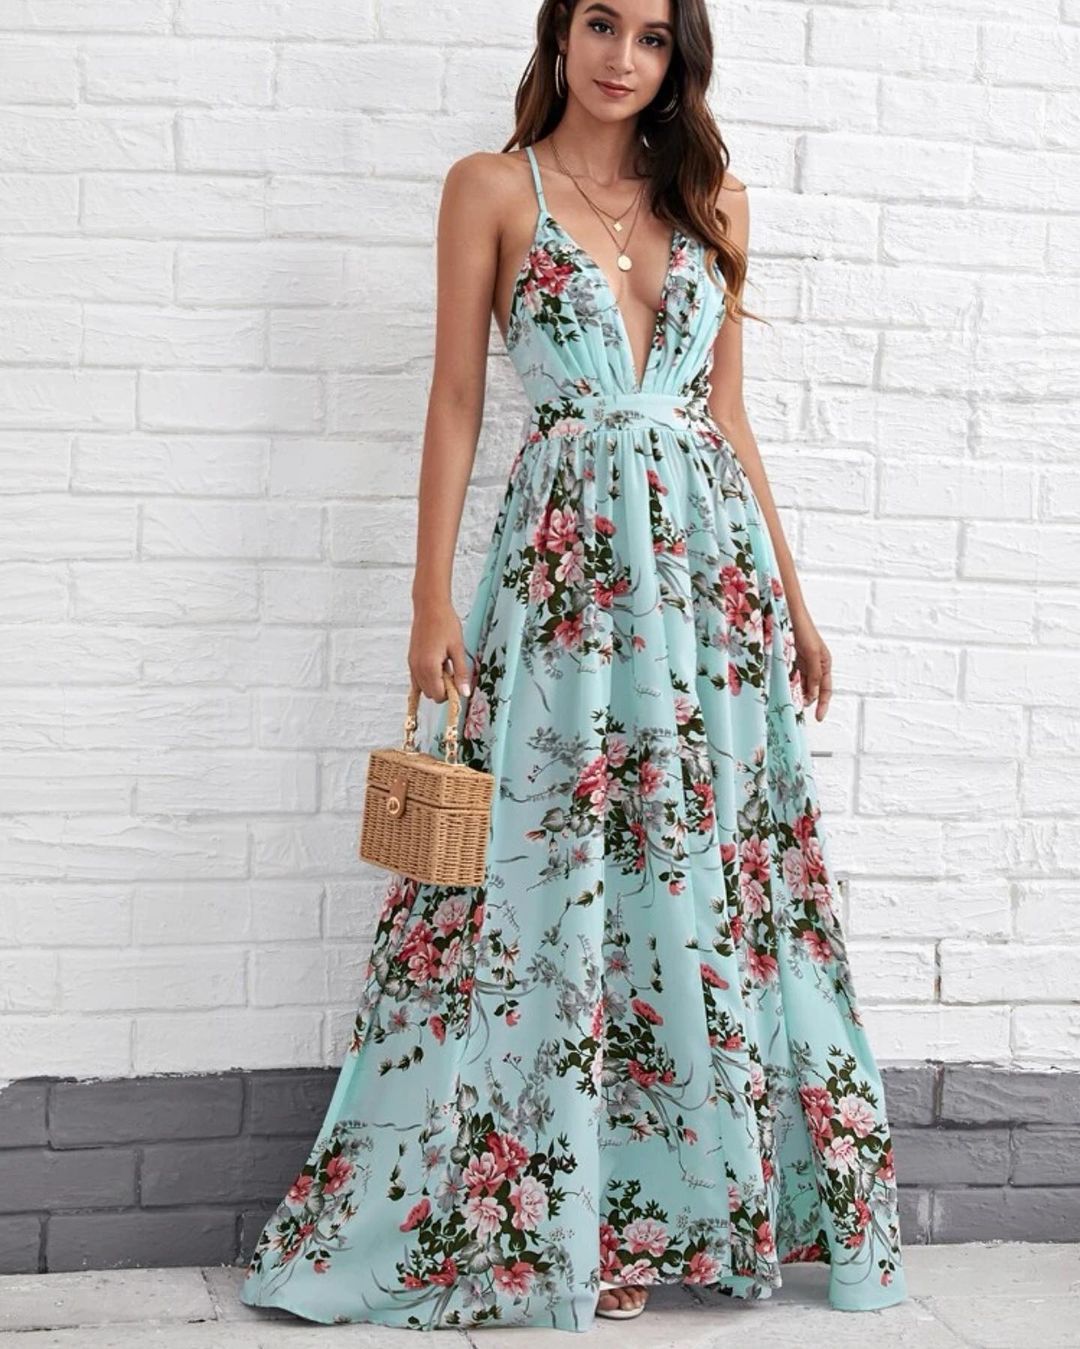 How To Wear Maxi Dresses: Versatile Outfits For Every Occasion